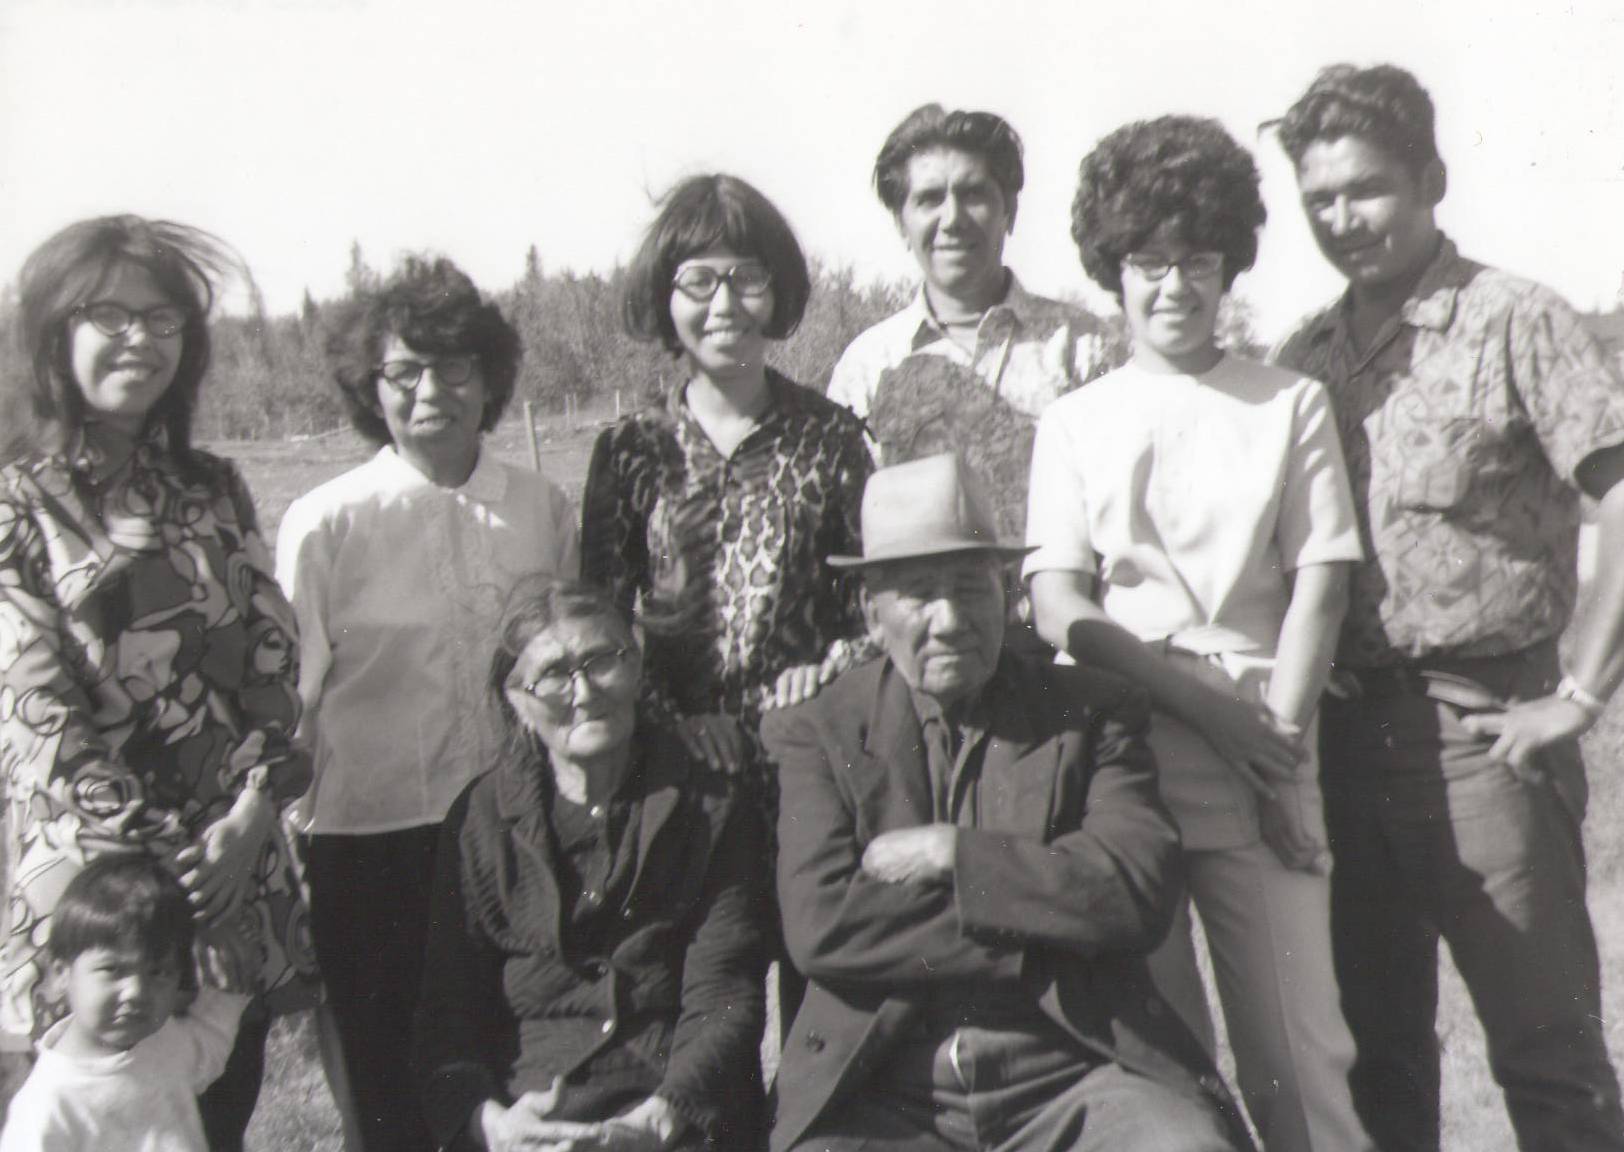 This appears to be a family photo of 4 (?) generations - none of whom we are able to identify. There is no date attached to the photo but based on the hair style, patterns of clothing and fancy winged glasses our best guess is sometime in the 60's.

*EDIT* 

This is the Roberts Family. Starting to the back left is Donna Roberts and the child is Leon Mercredi.

Next to her is Celine (Moberly) Roberts, Vina (Roberts) Marten, Norbert Roberts, Emilie Roberts, Chuck Badger (former spouse to Emilie)
Norbert’s parents in front Claudell and Thomas Roberts’s

2000.35.02.12 / Bell, Lorna